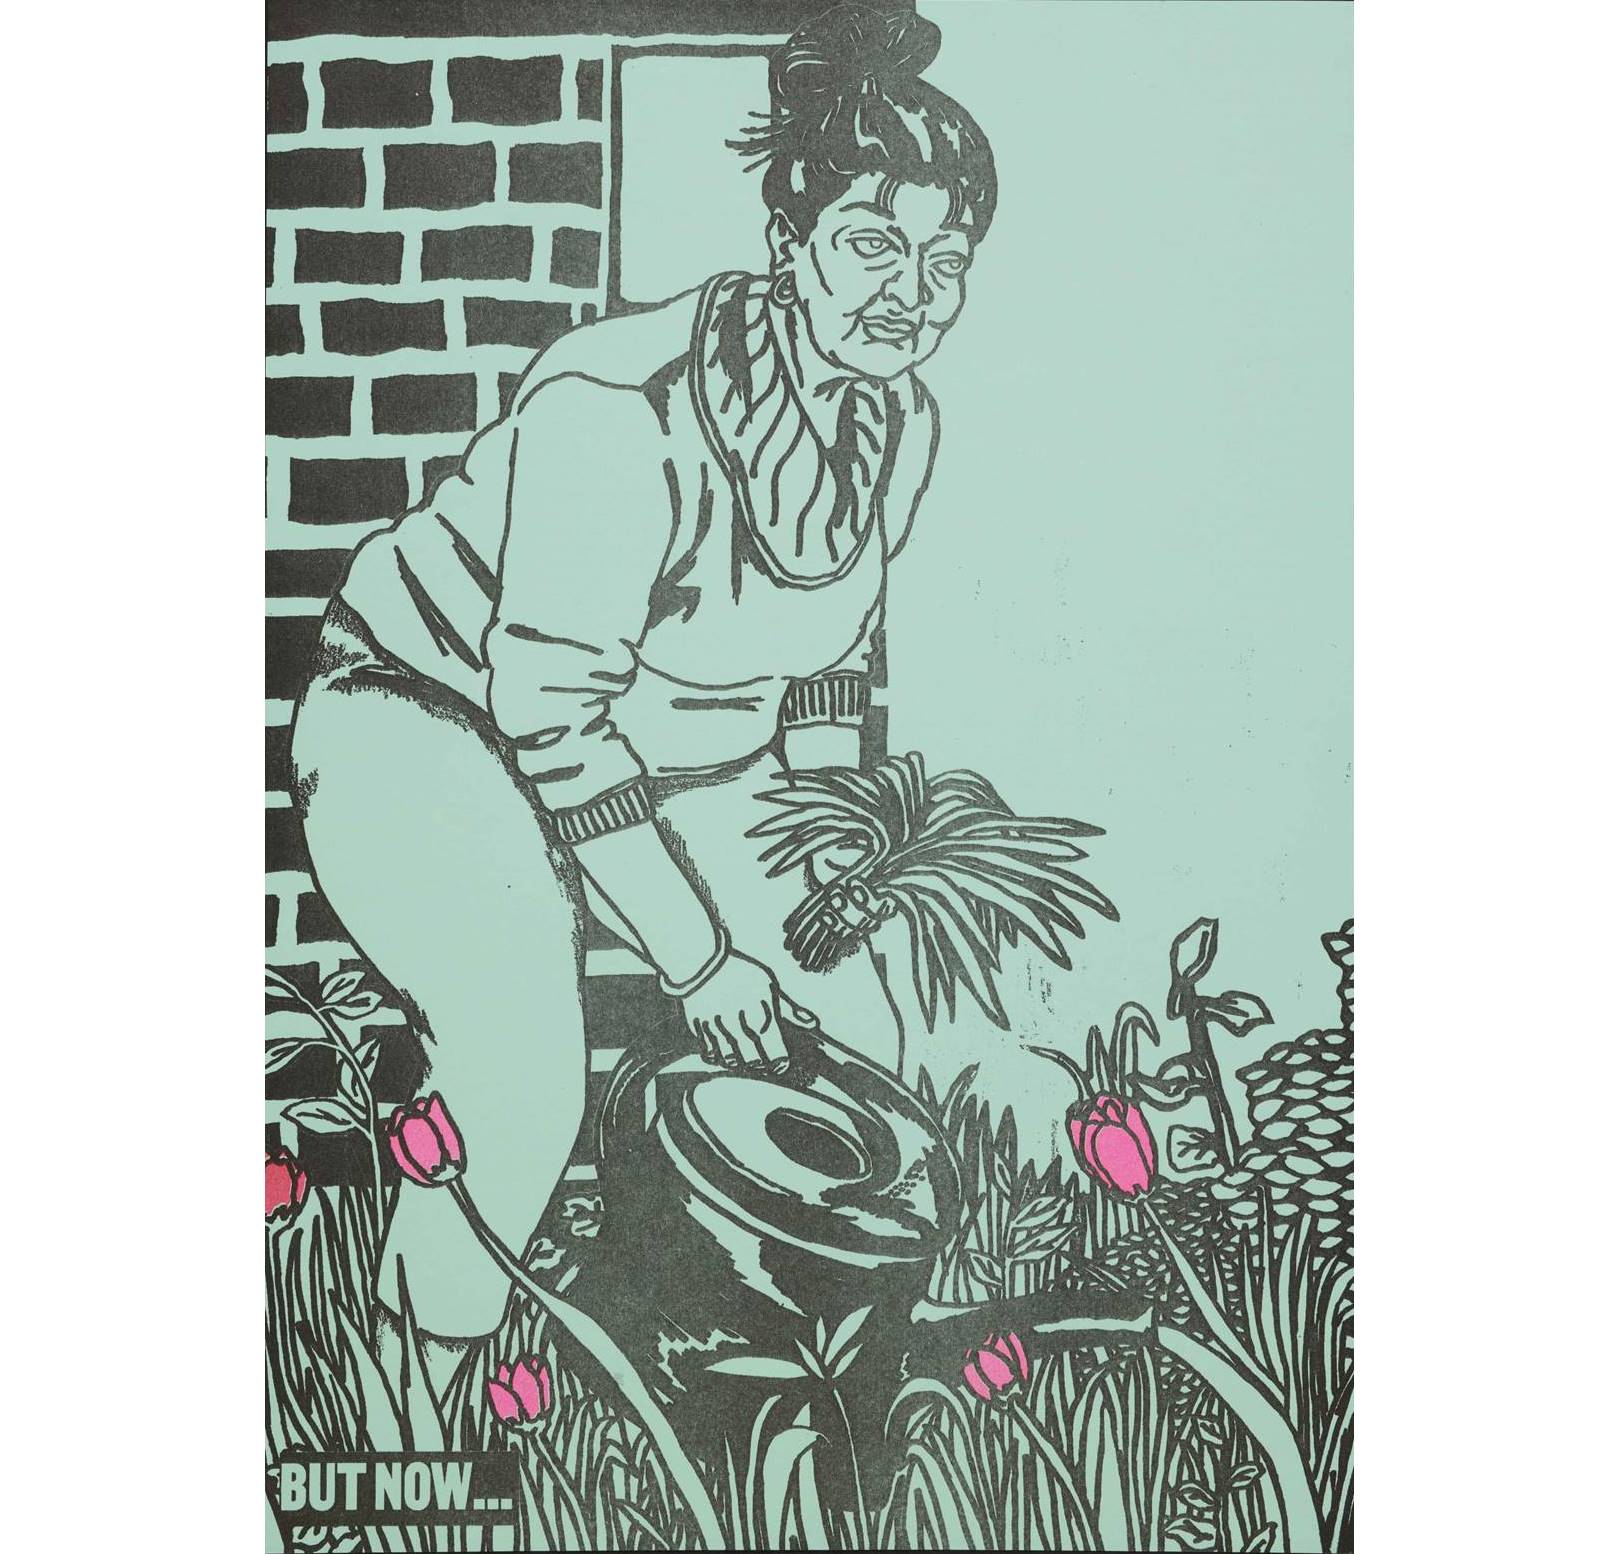 But now… (ID no.: 2021.236) The image shows a woman in a garden holding a watering can, with pink flowers growing around her and a brick wall of a house behind. It has a vibrant green background throughout.